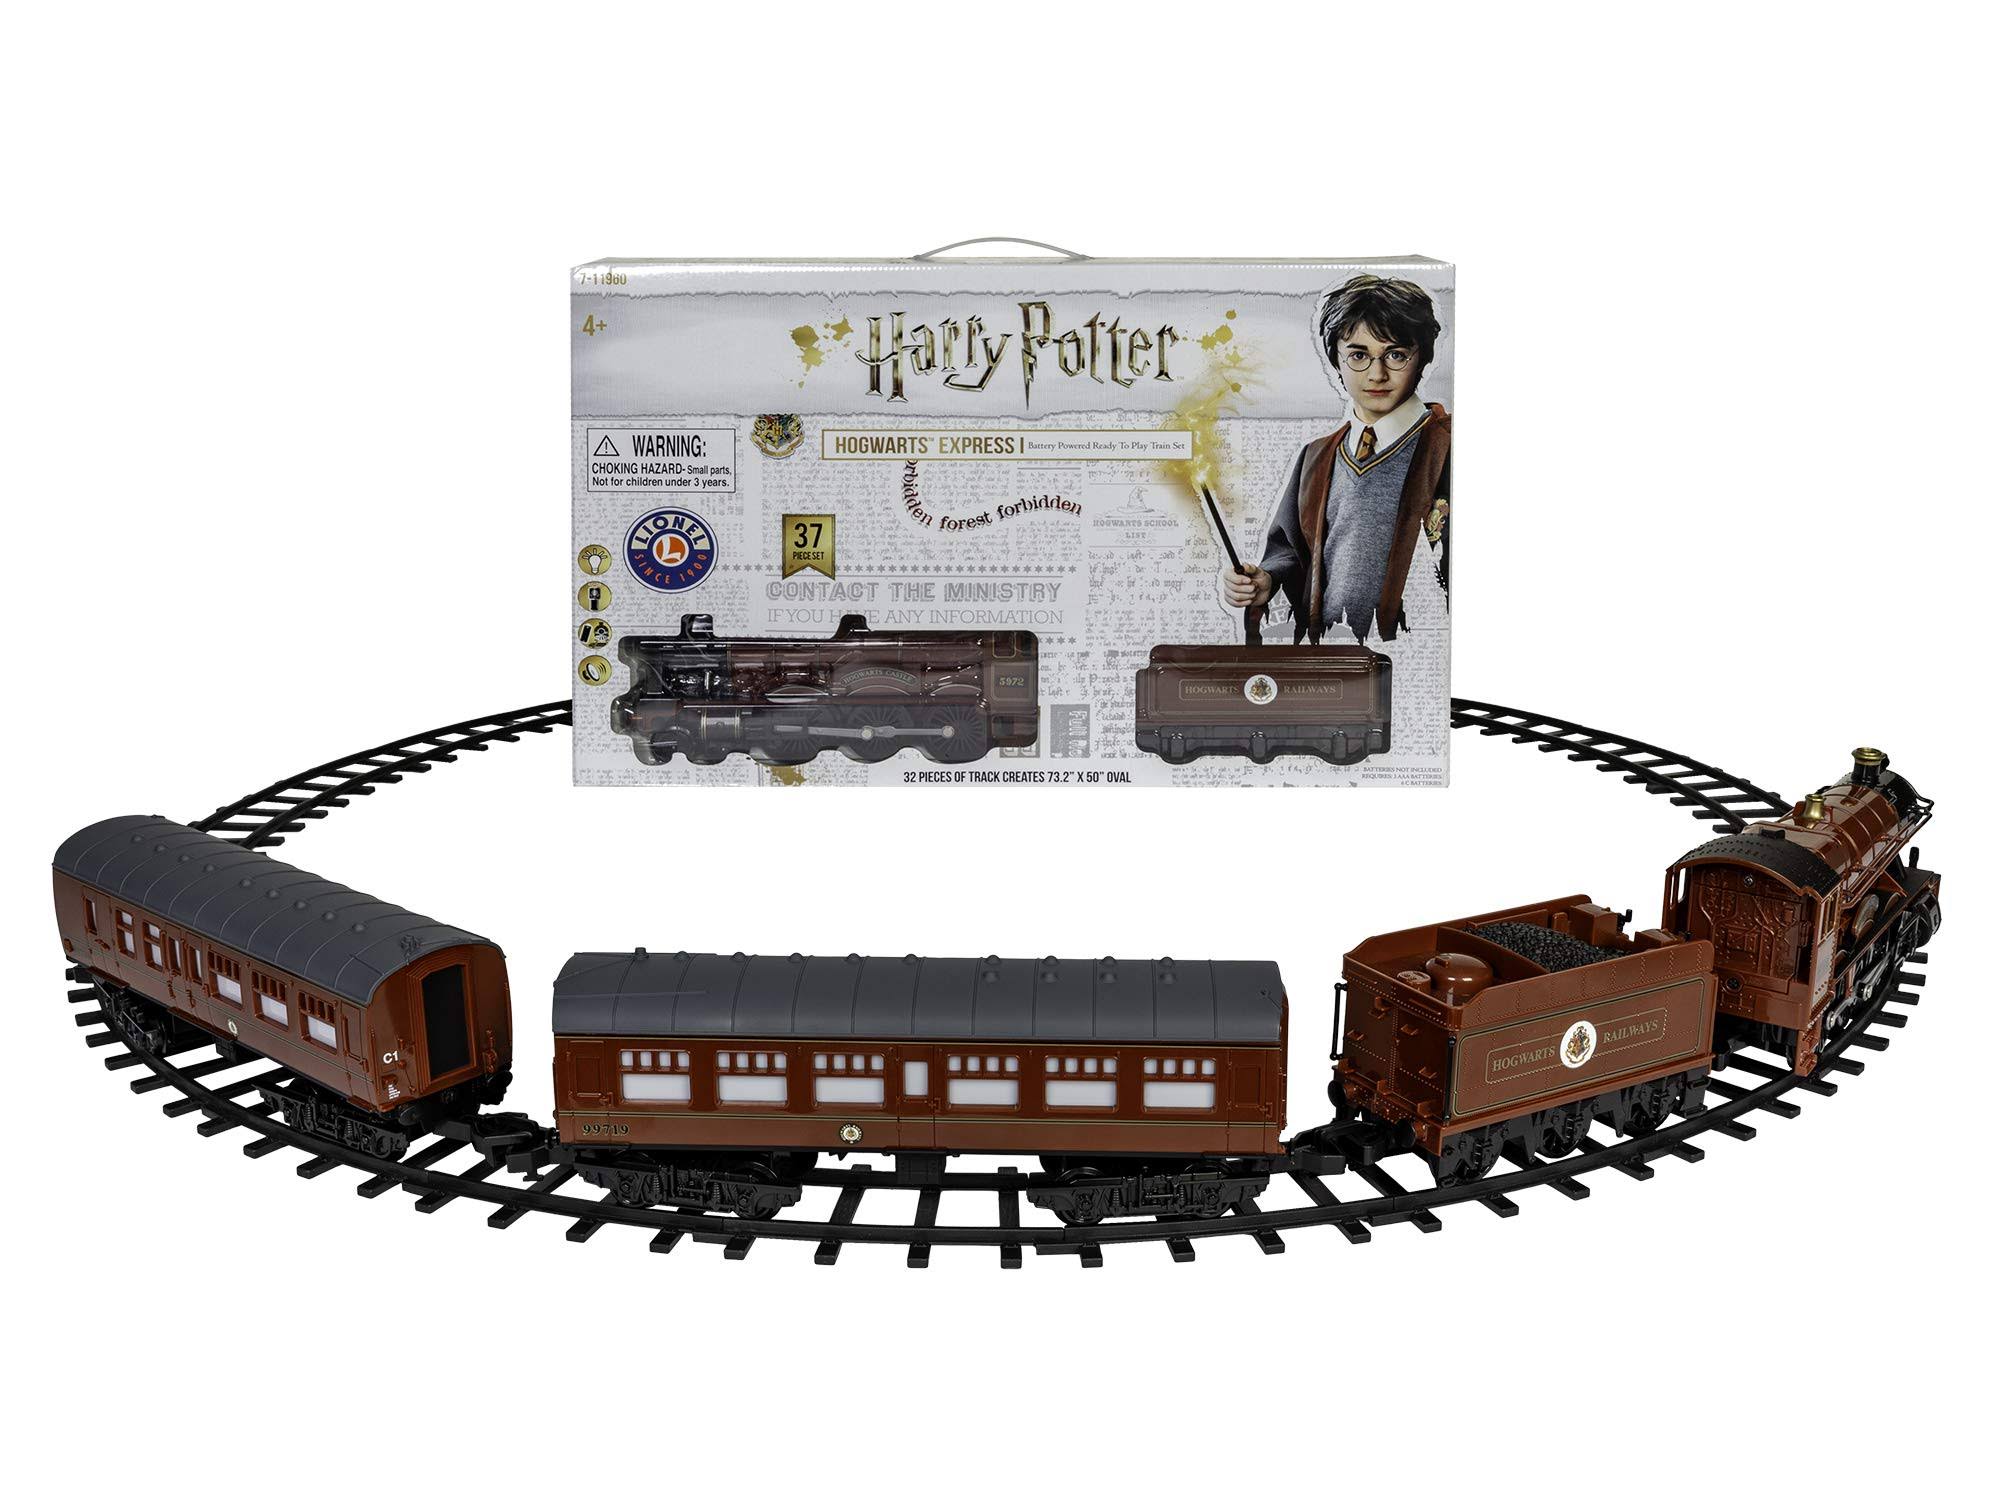 Lionel Hogwarts Express Ready-to-Play 4-6-0 Set, Battery-Powered Model